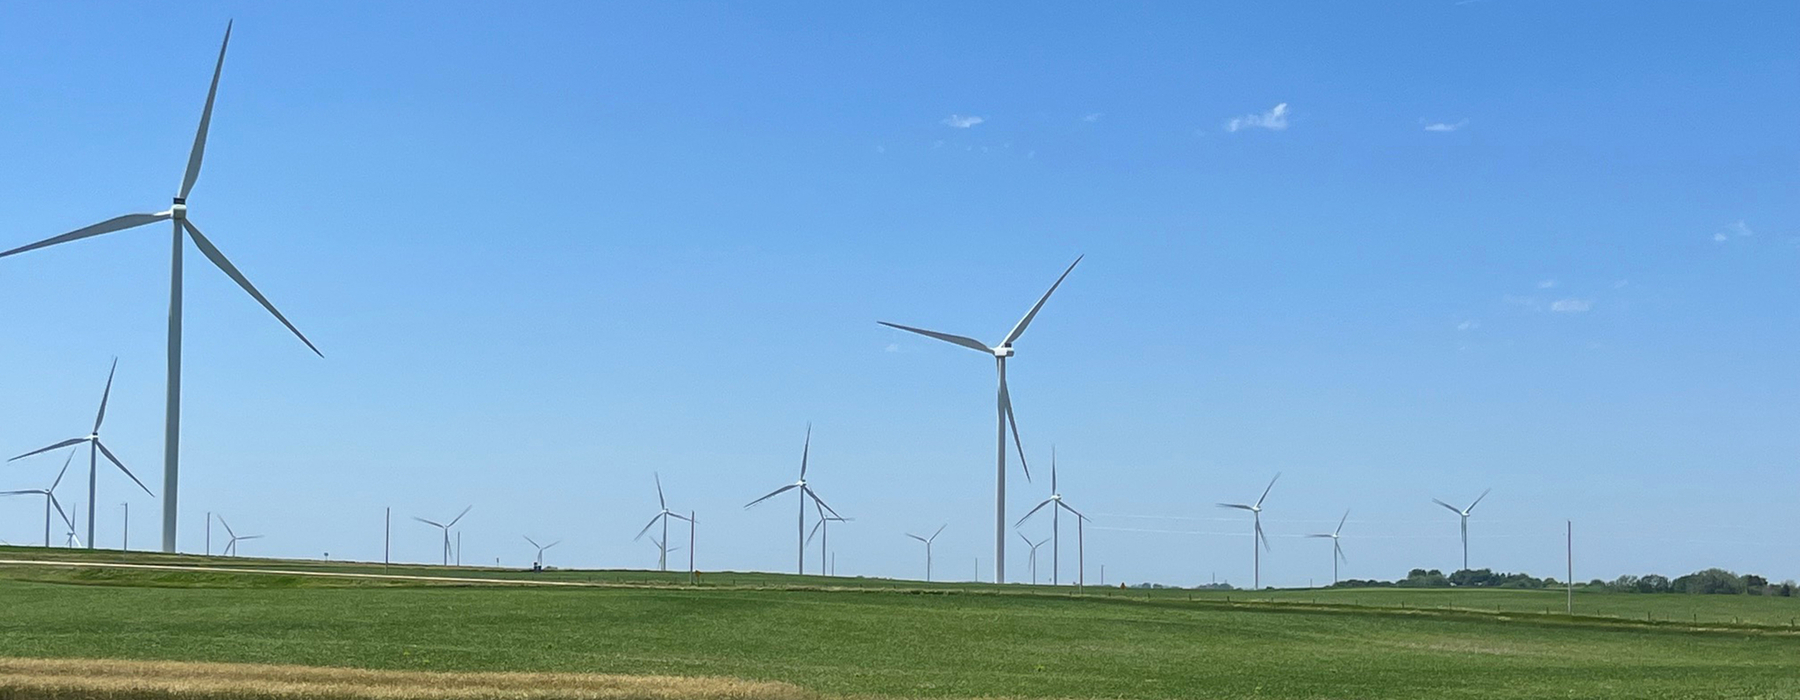 Multiple wind turbines in a green field with a blue sky